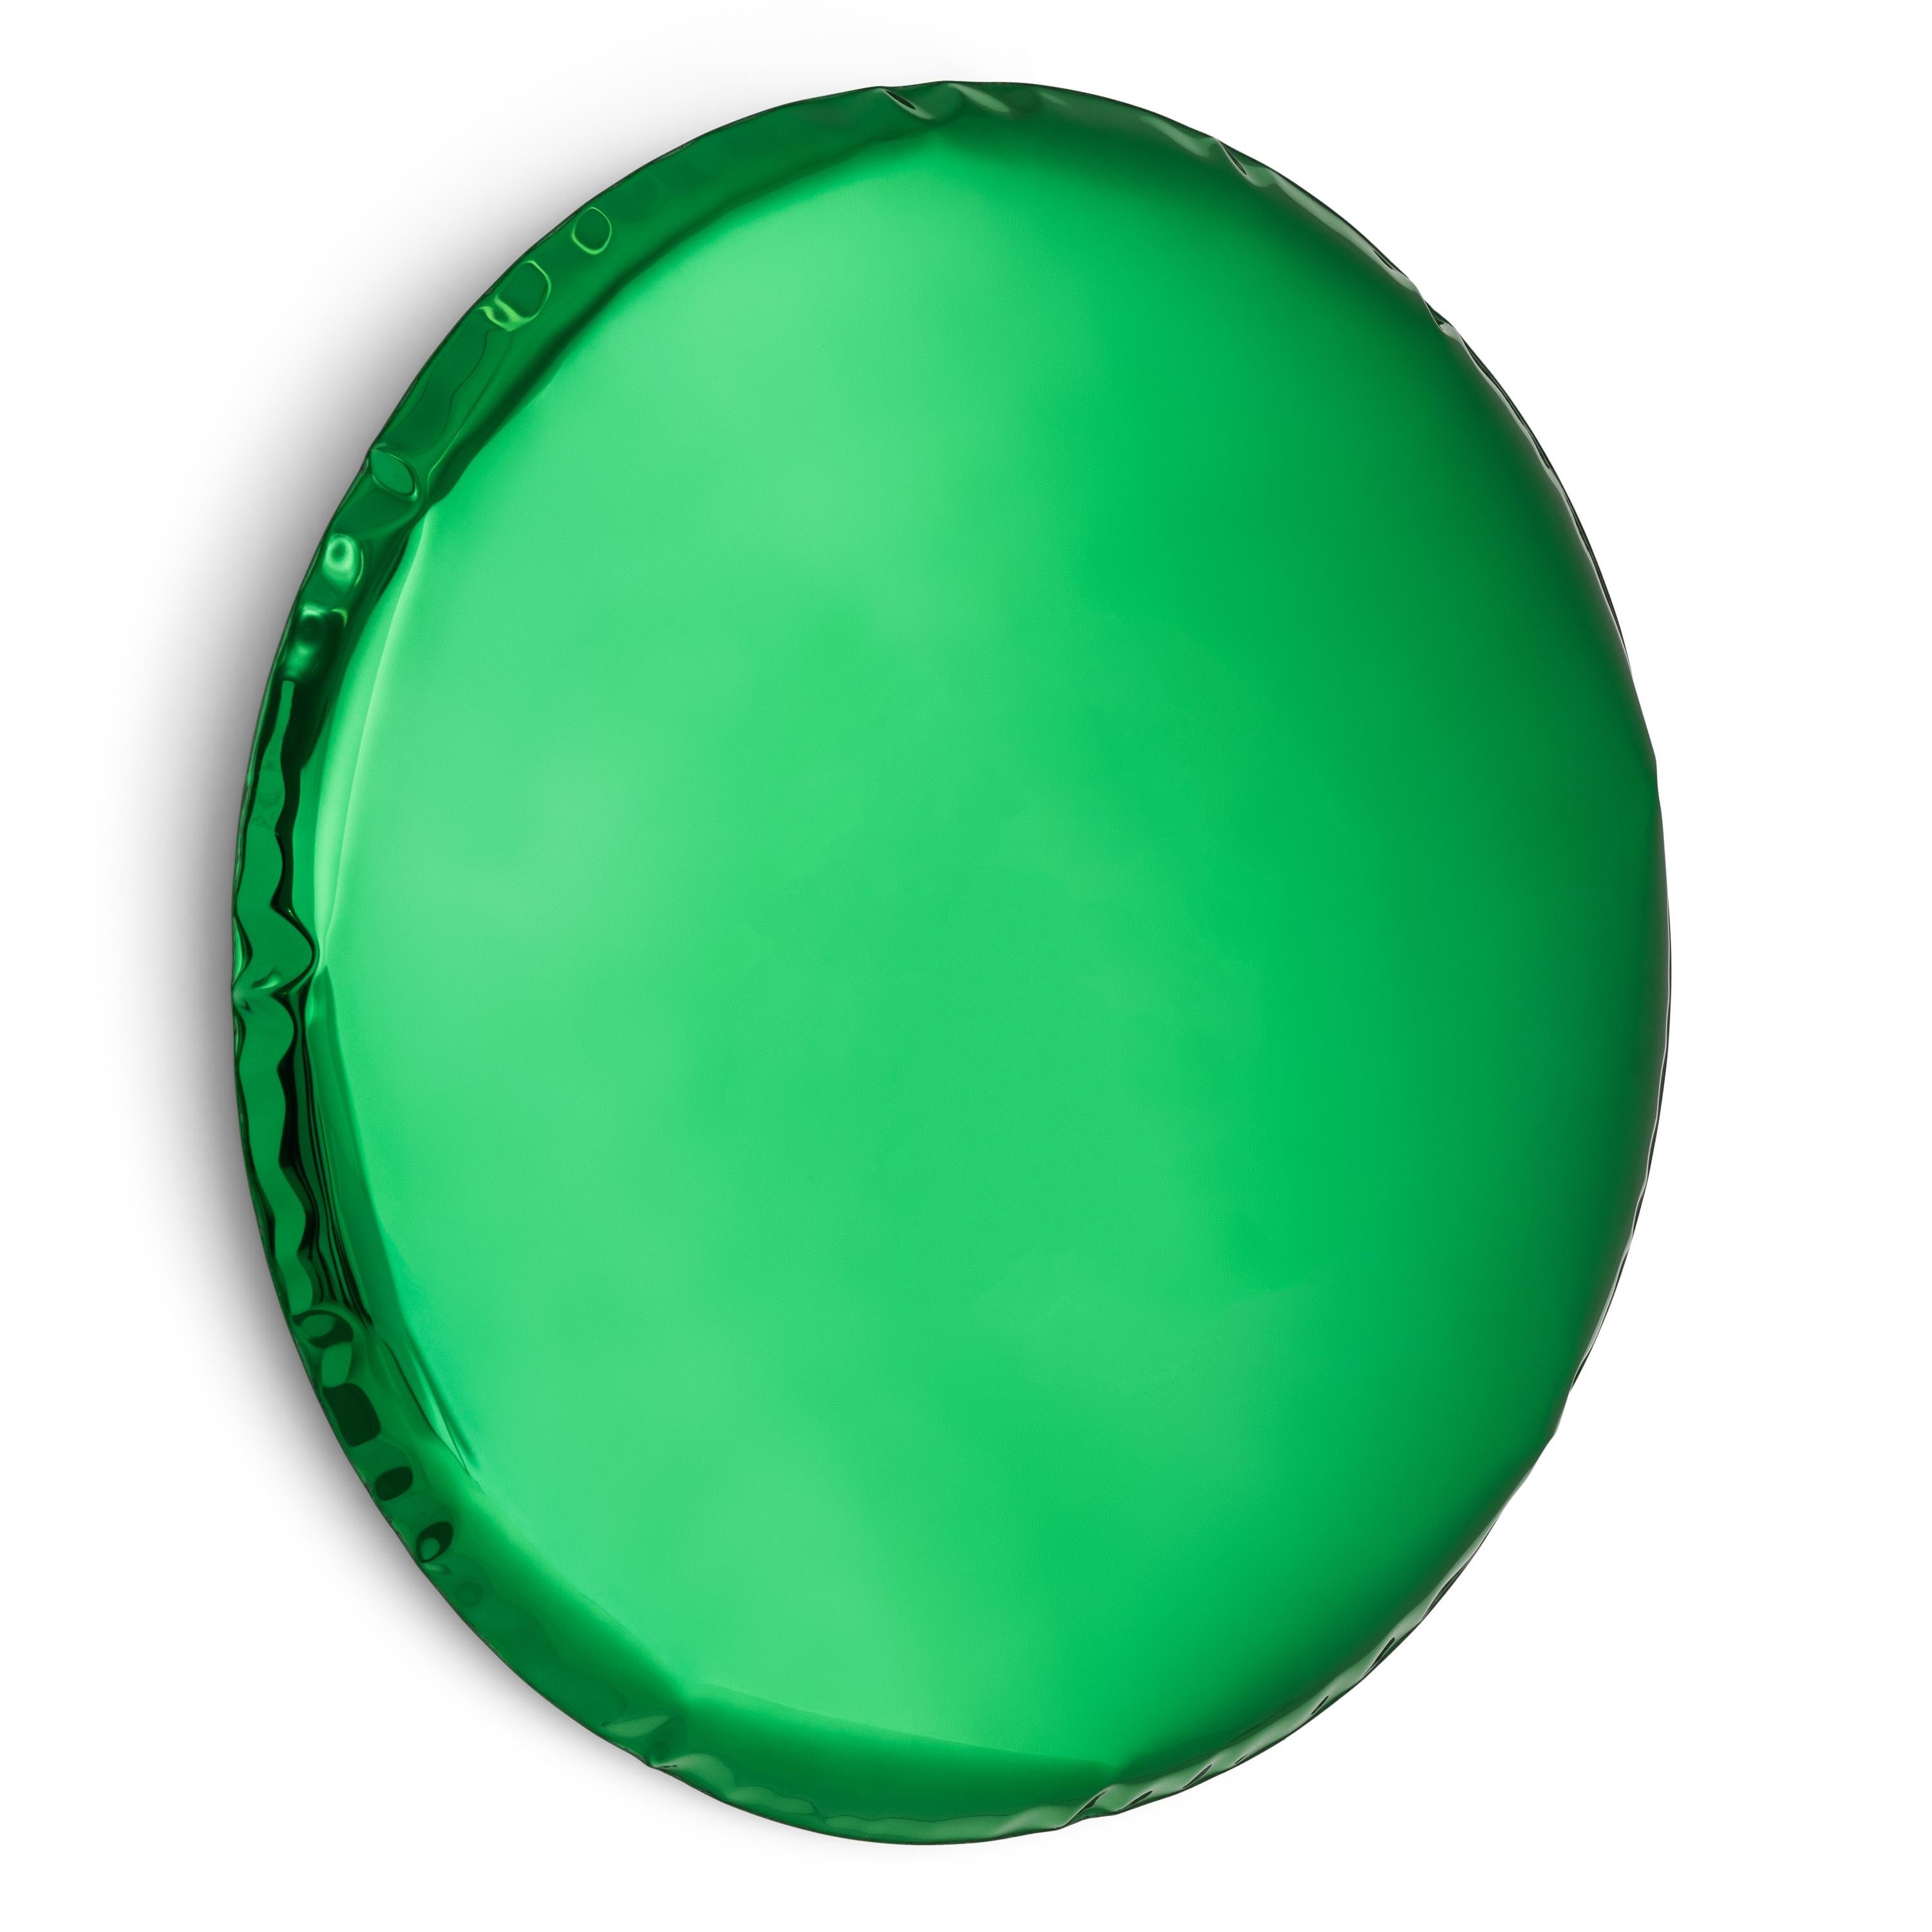 Emerald Oko 150 sculptural wall mirror by Zieta
Dimensions: diameter 150 x depth 6 cm 
Material: stainless steel. 
Finish: Emerald.
Available in finishes: stainless steel, deep space blue, emerald, saphire, saphire/emerald, dark matter, and red